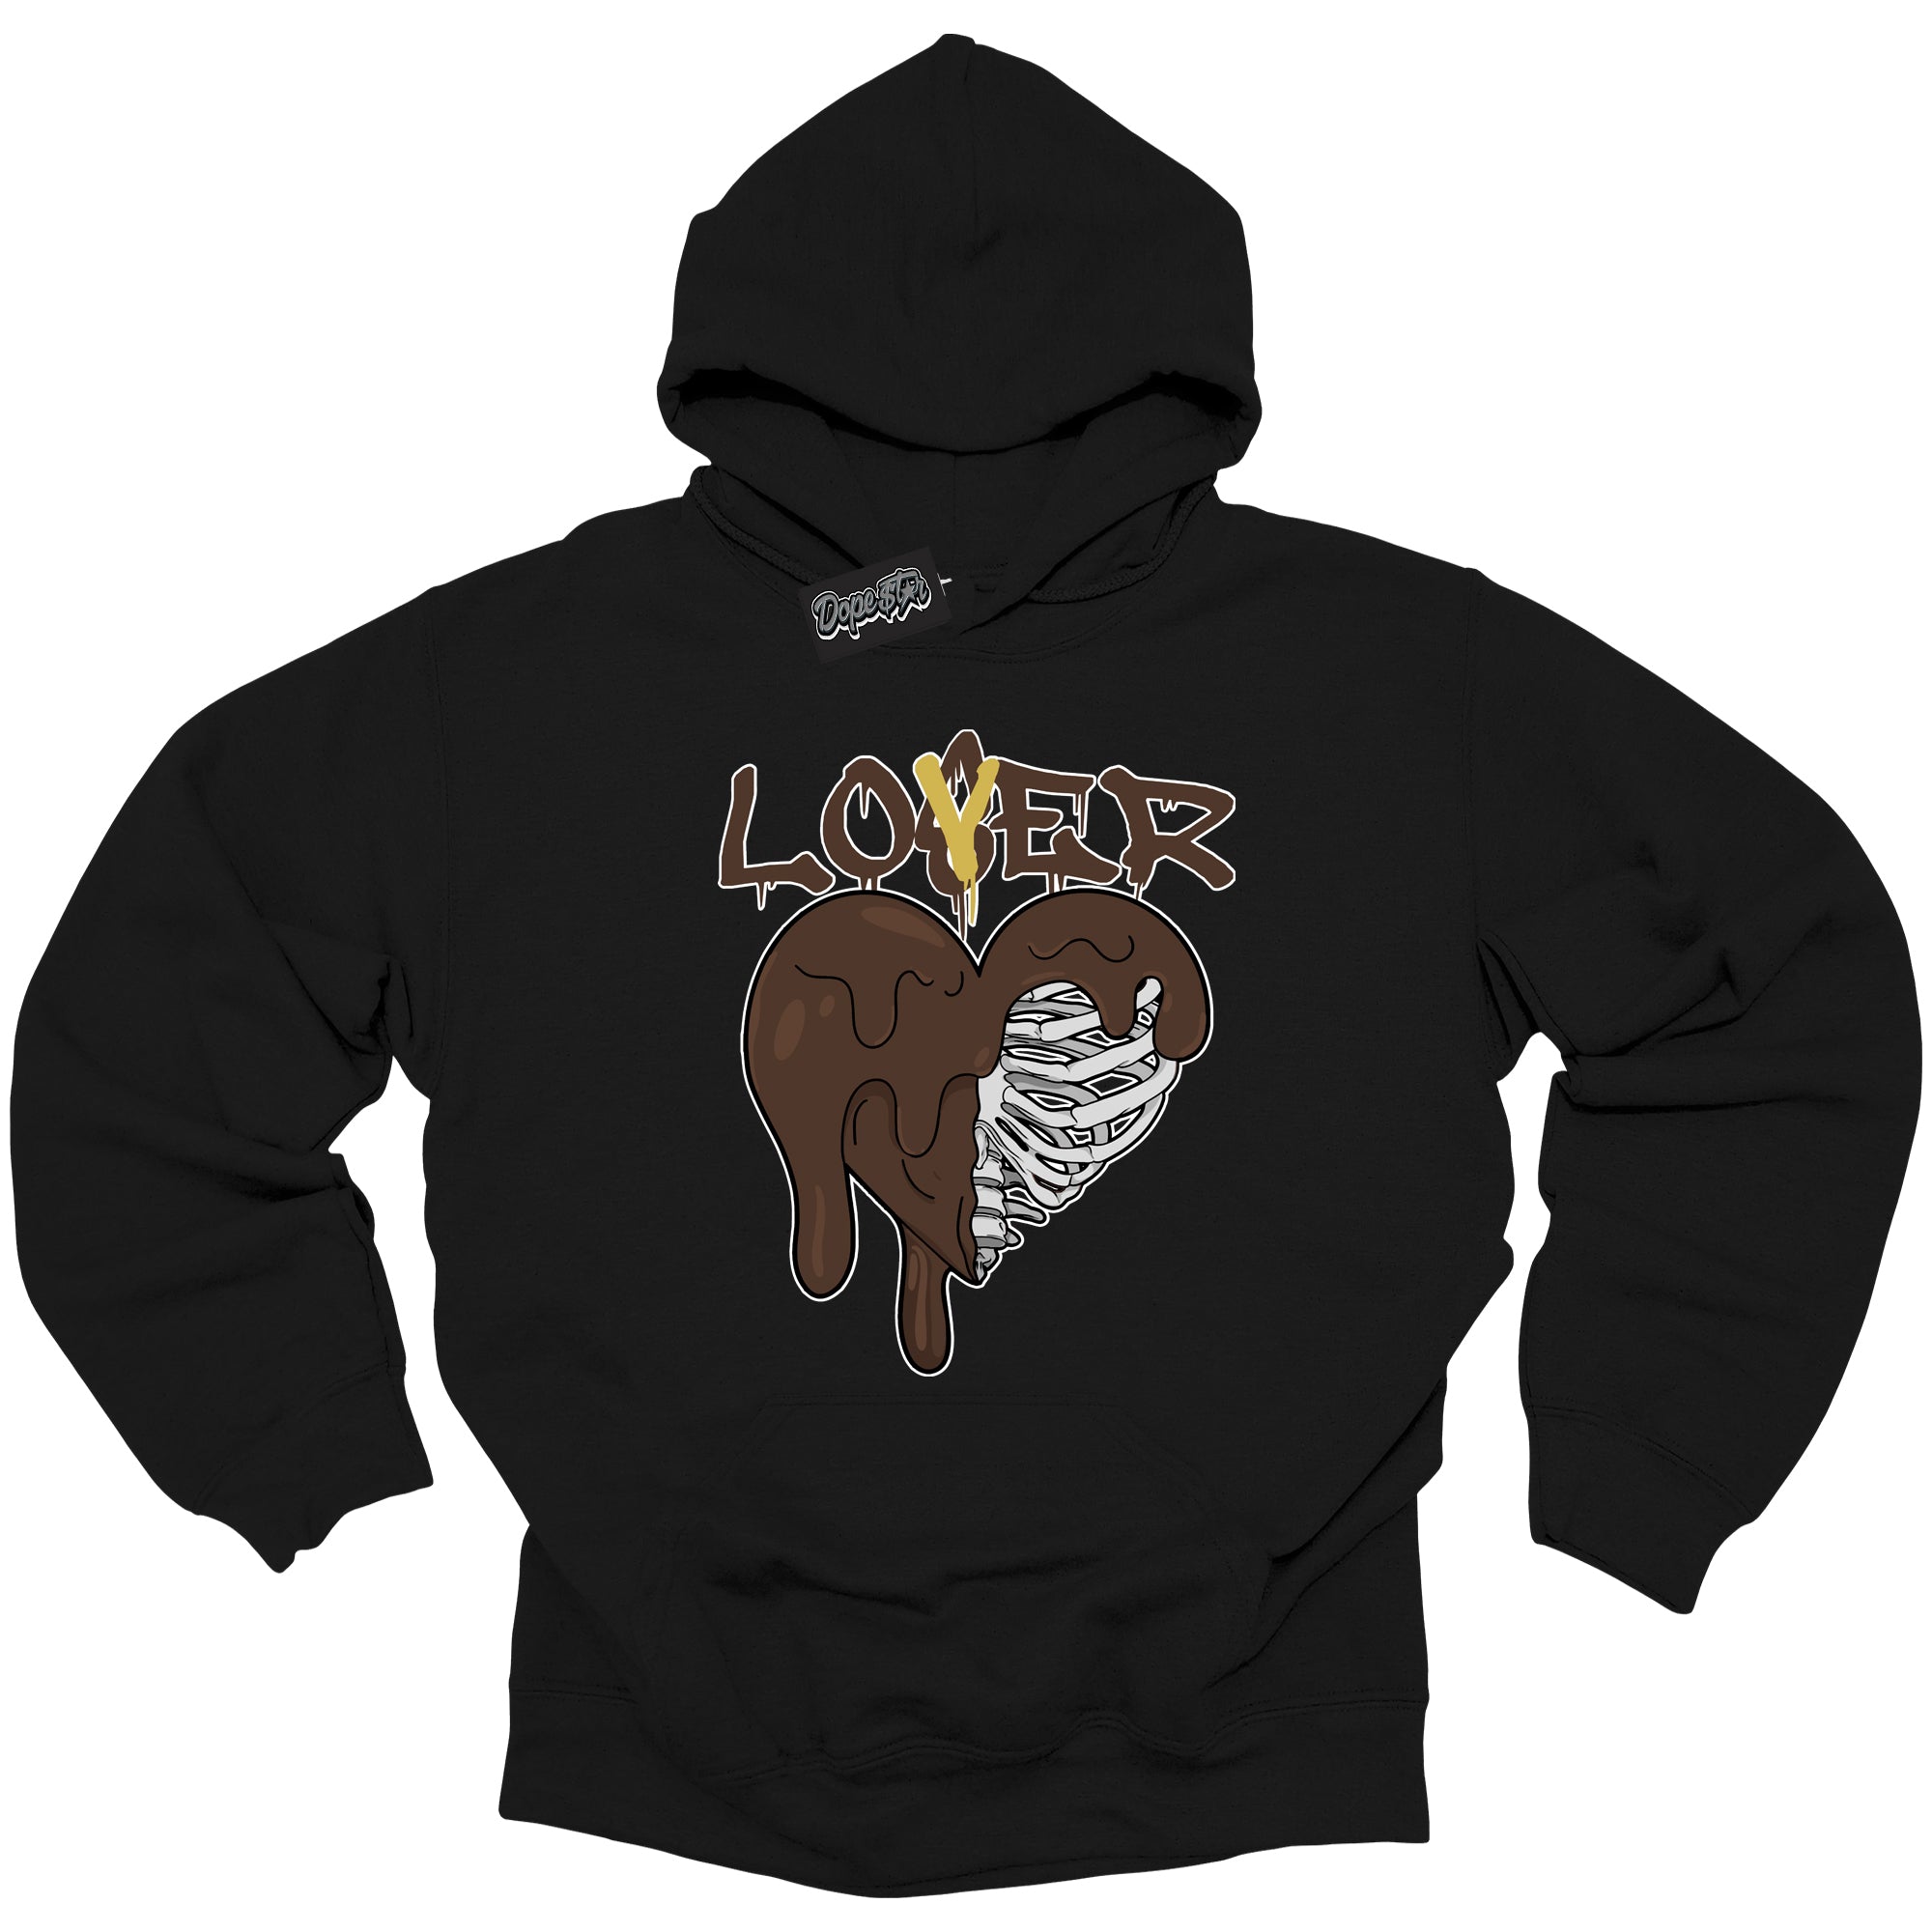 Cool Black Graphic DopeStar Hoodie with “ Lover Loser “ print, that perfectly matches Palomino 1s sneakers